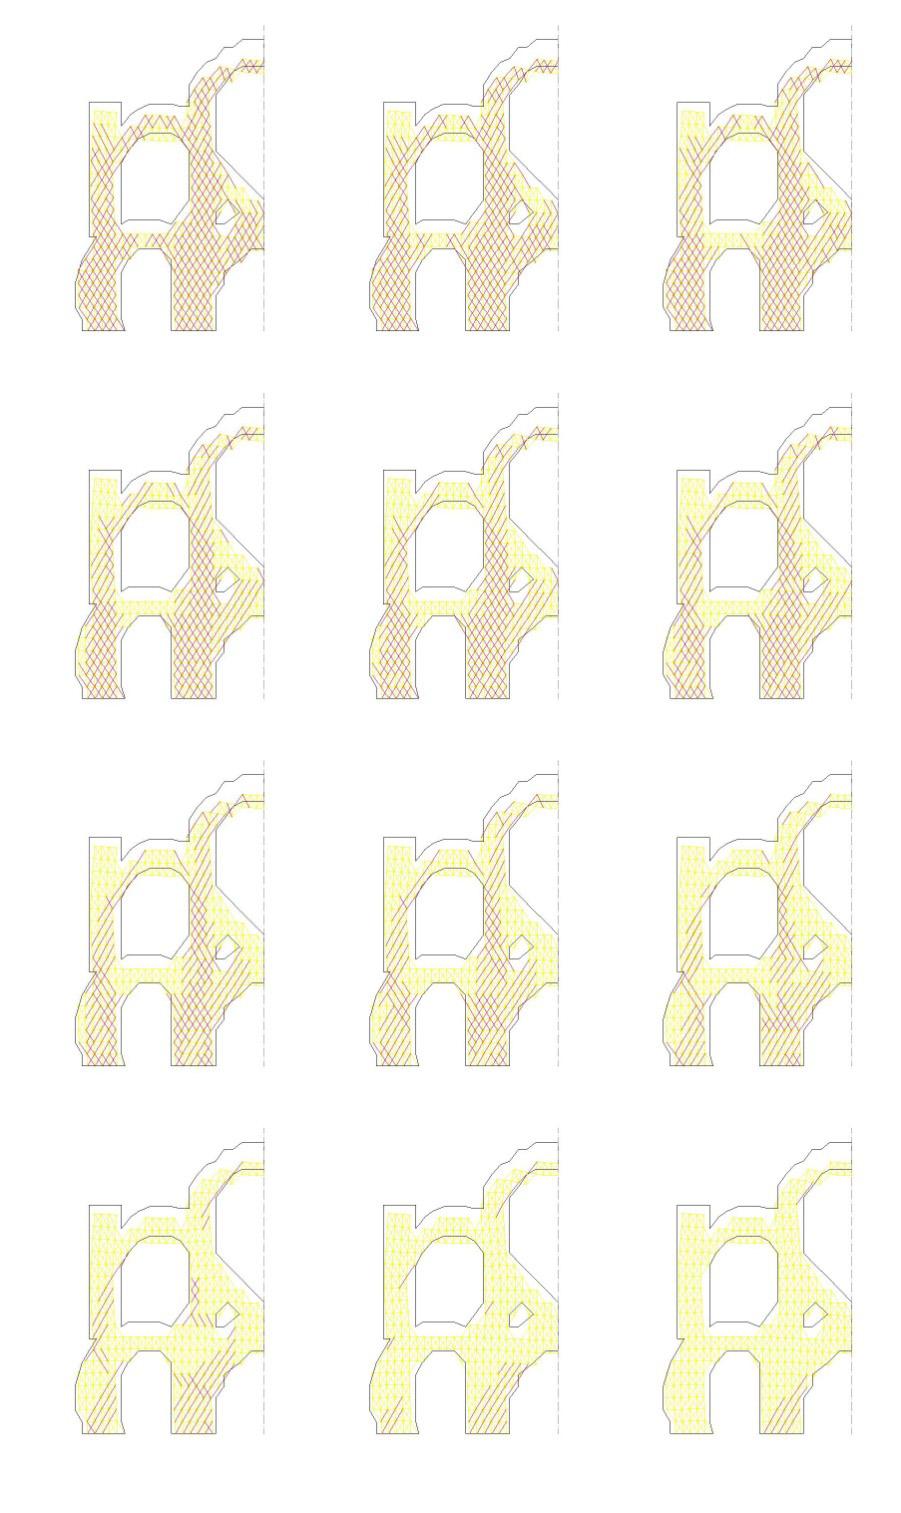 388 High Performance and Optimum Design of Structures and Materials (a) Figure 8: Iterative